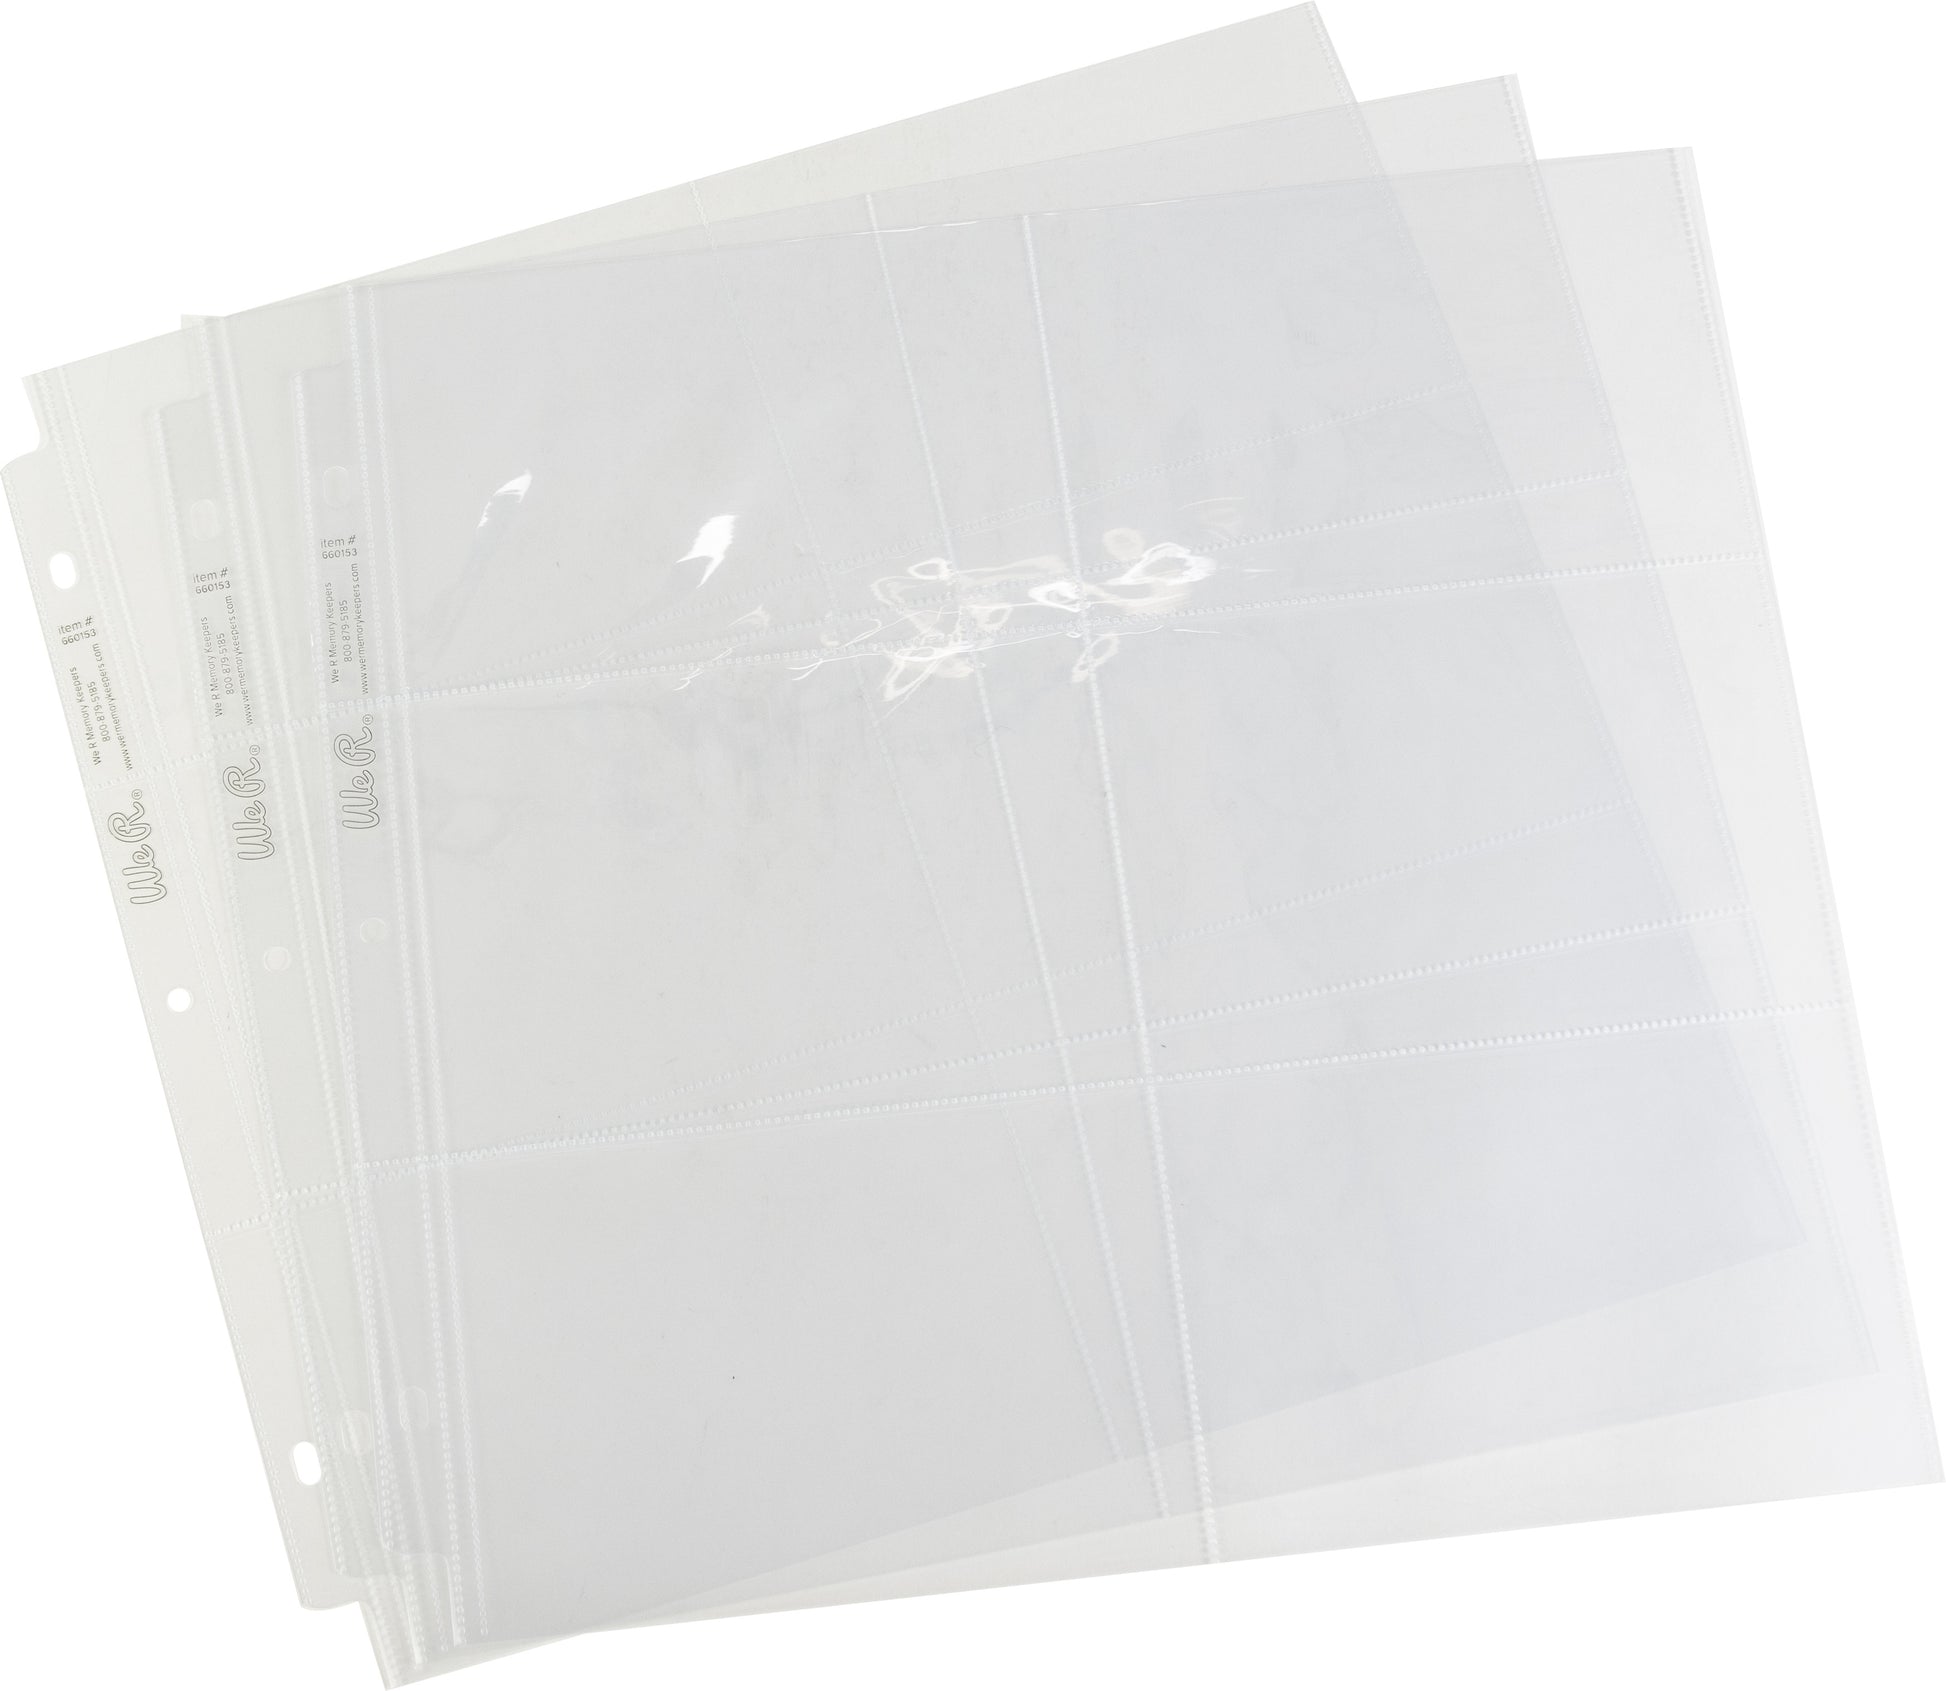 We-R-Memory Keepers - Ring Album 10 Pack Photo Sleeves (6x4 and 4x4)